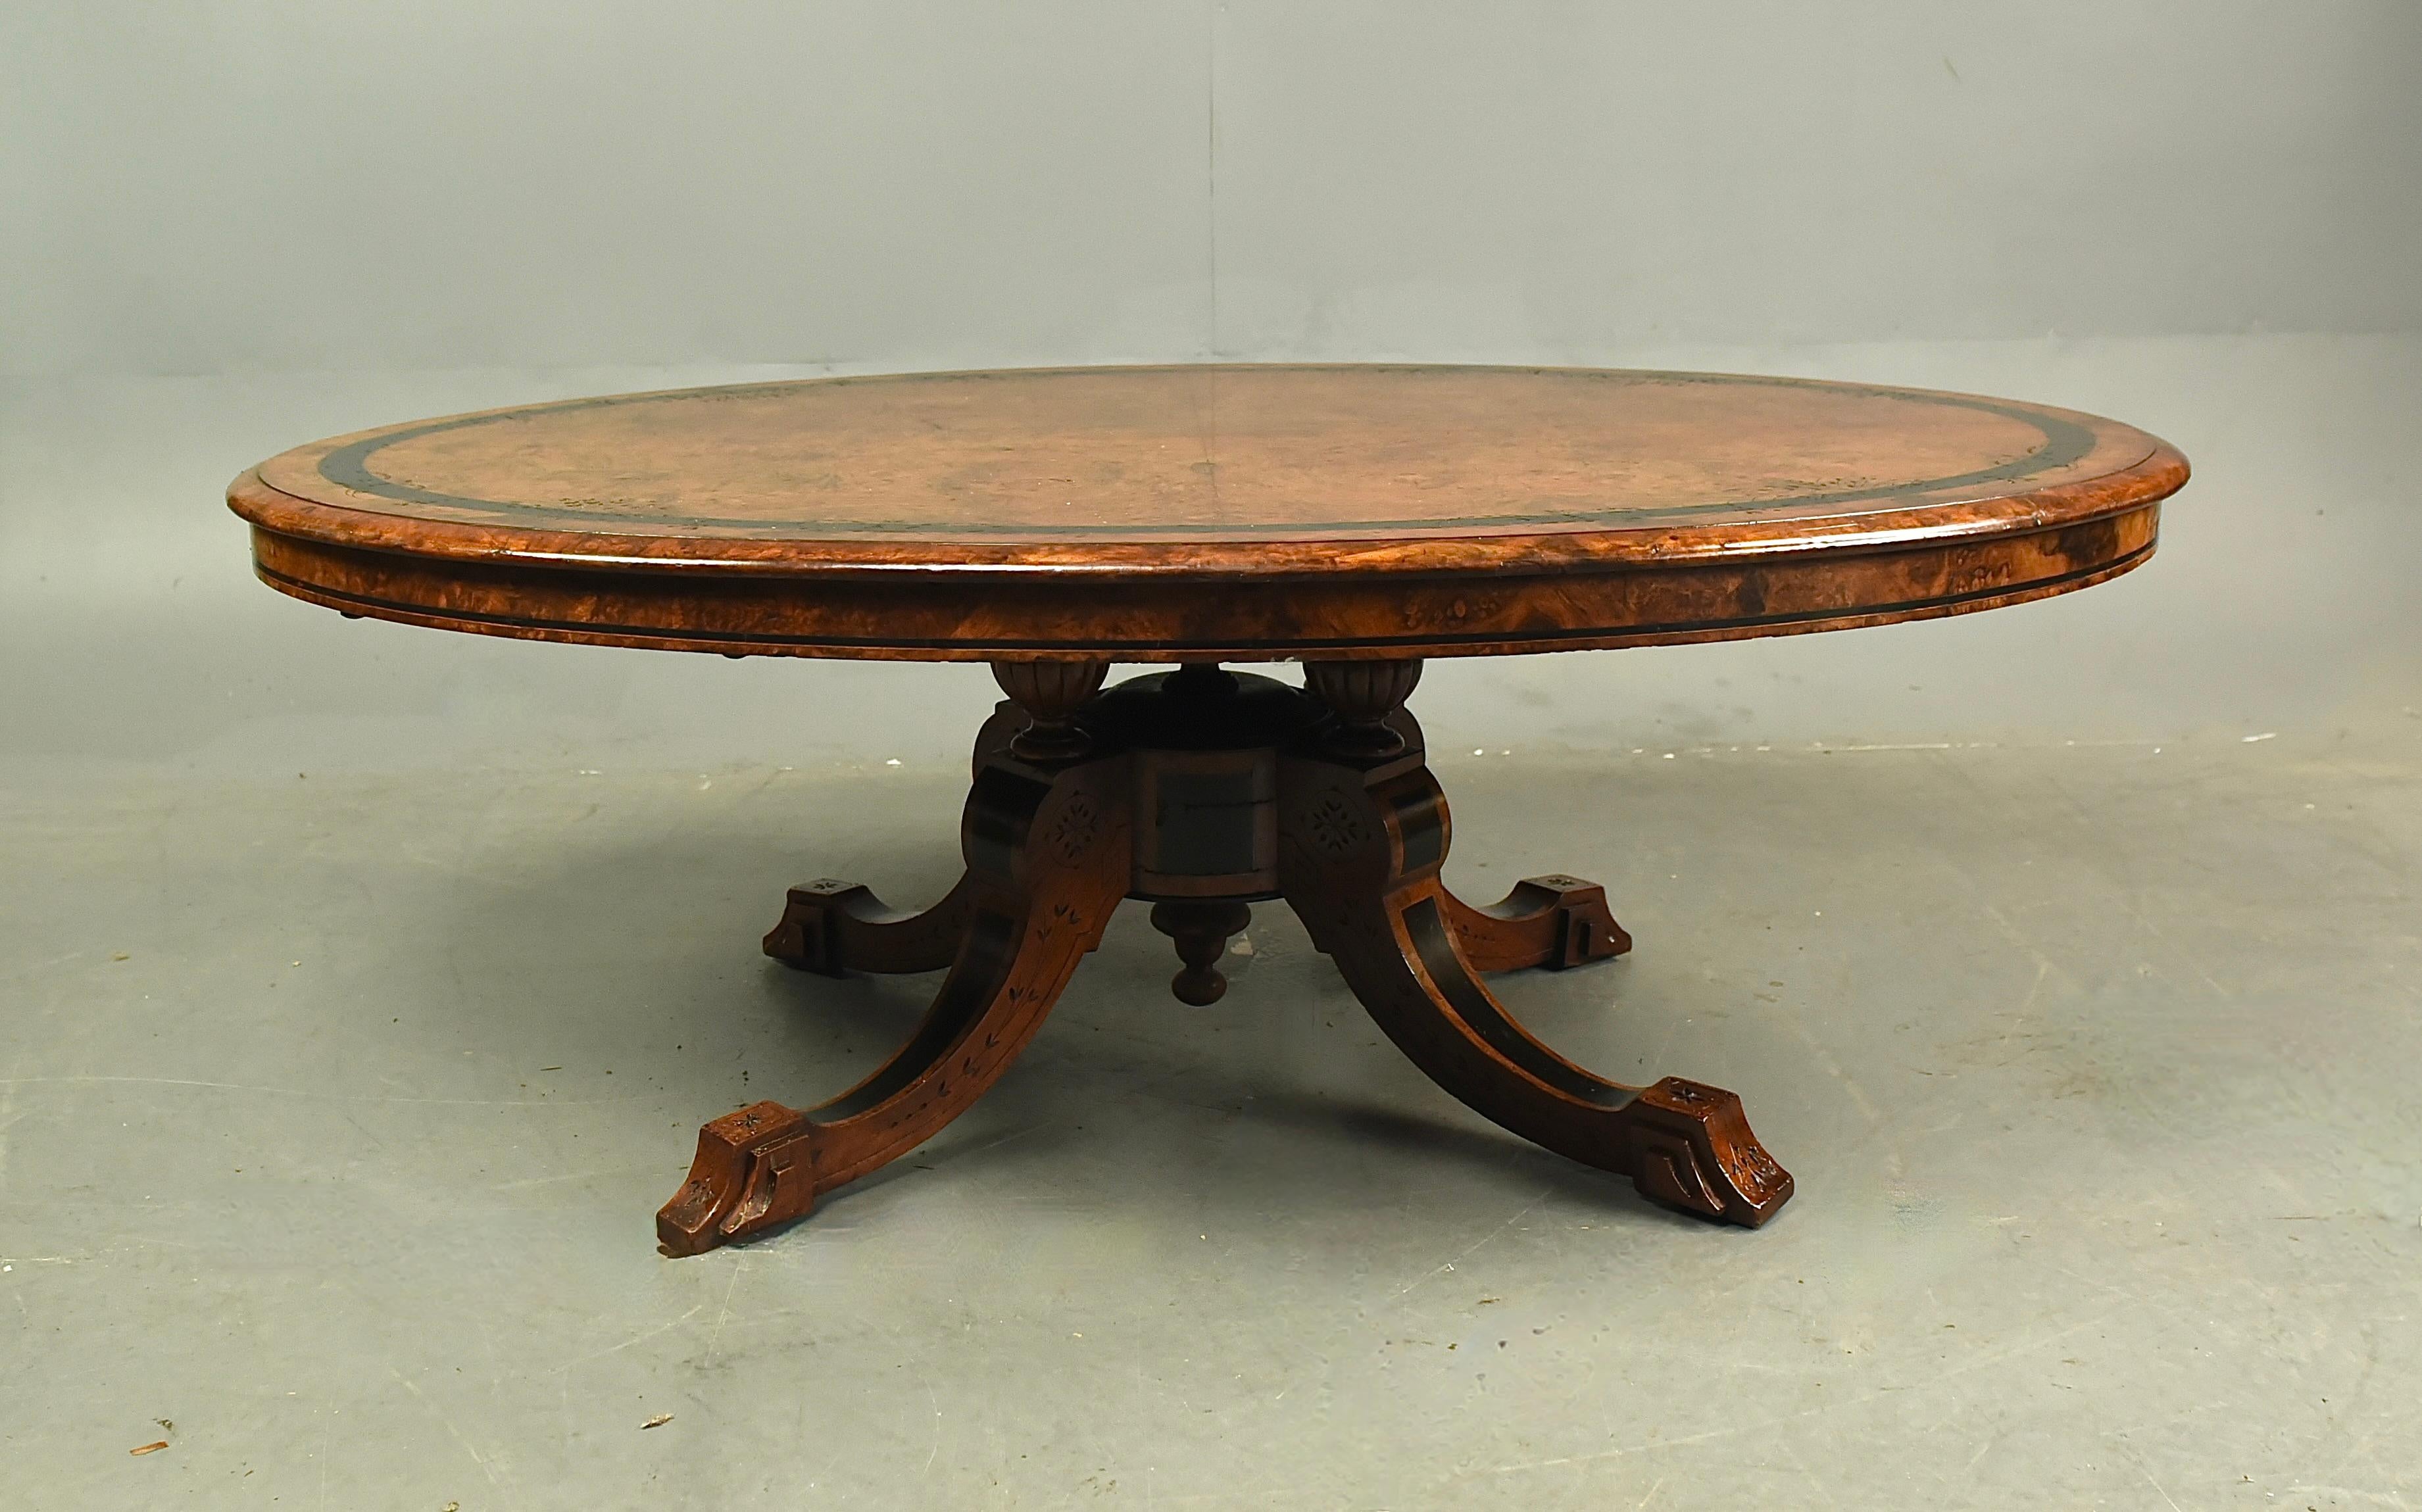 Fine Victorian oval burr walnut coffee table .
The coffee table is a great colour with good figuring with fine Quarter veneered burr walnut with ebony banding and fine  floral carved details .
The base has four out swept legs with ebony inlay and